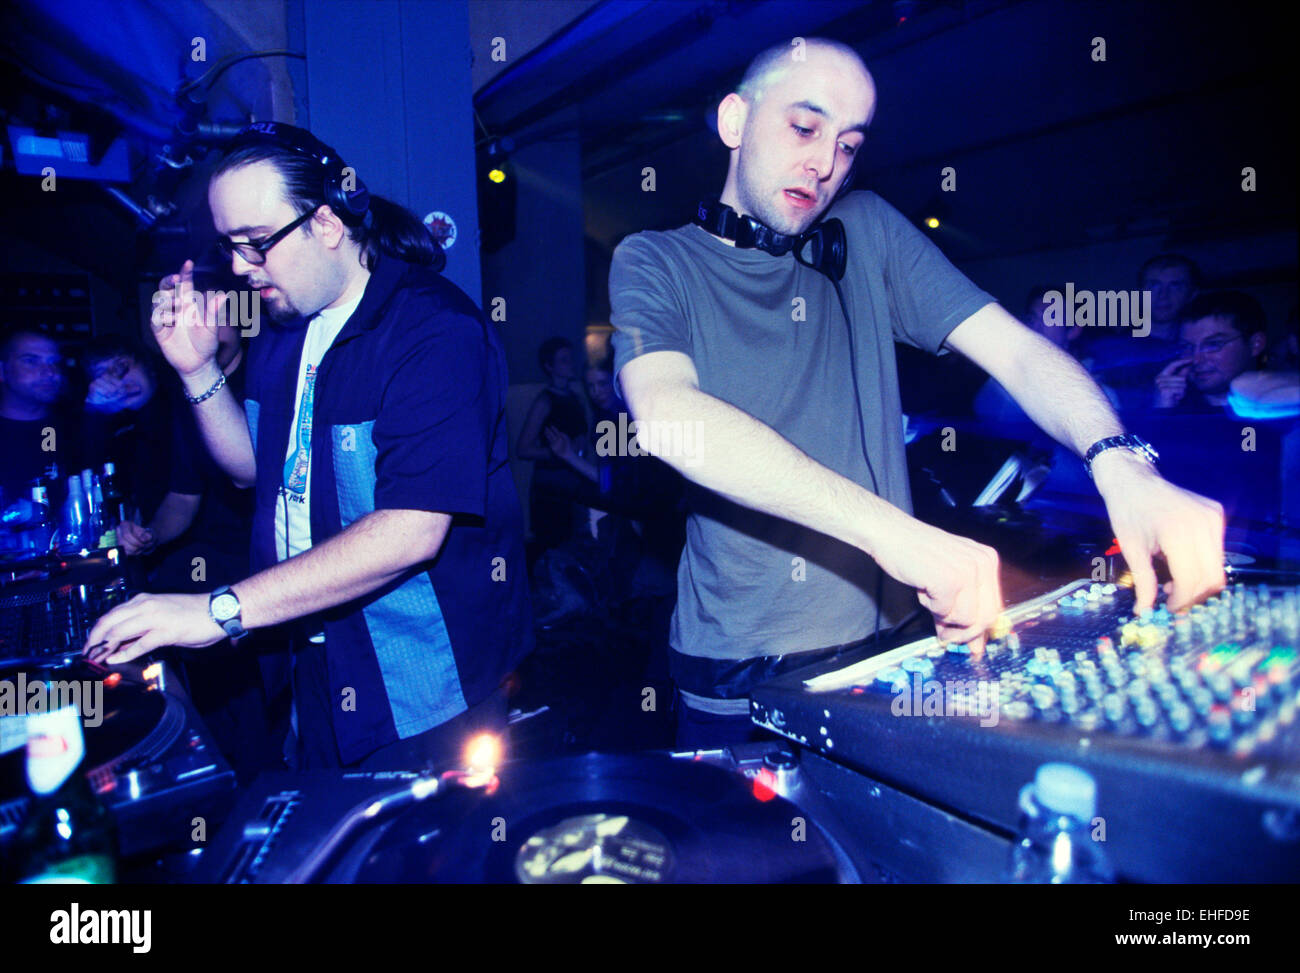 Jim Masters and Billy Nasty DJing together at The End London. Stock Photo